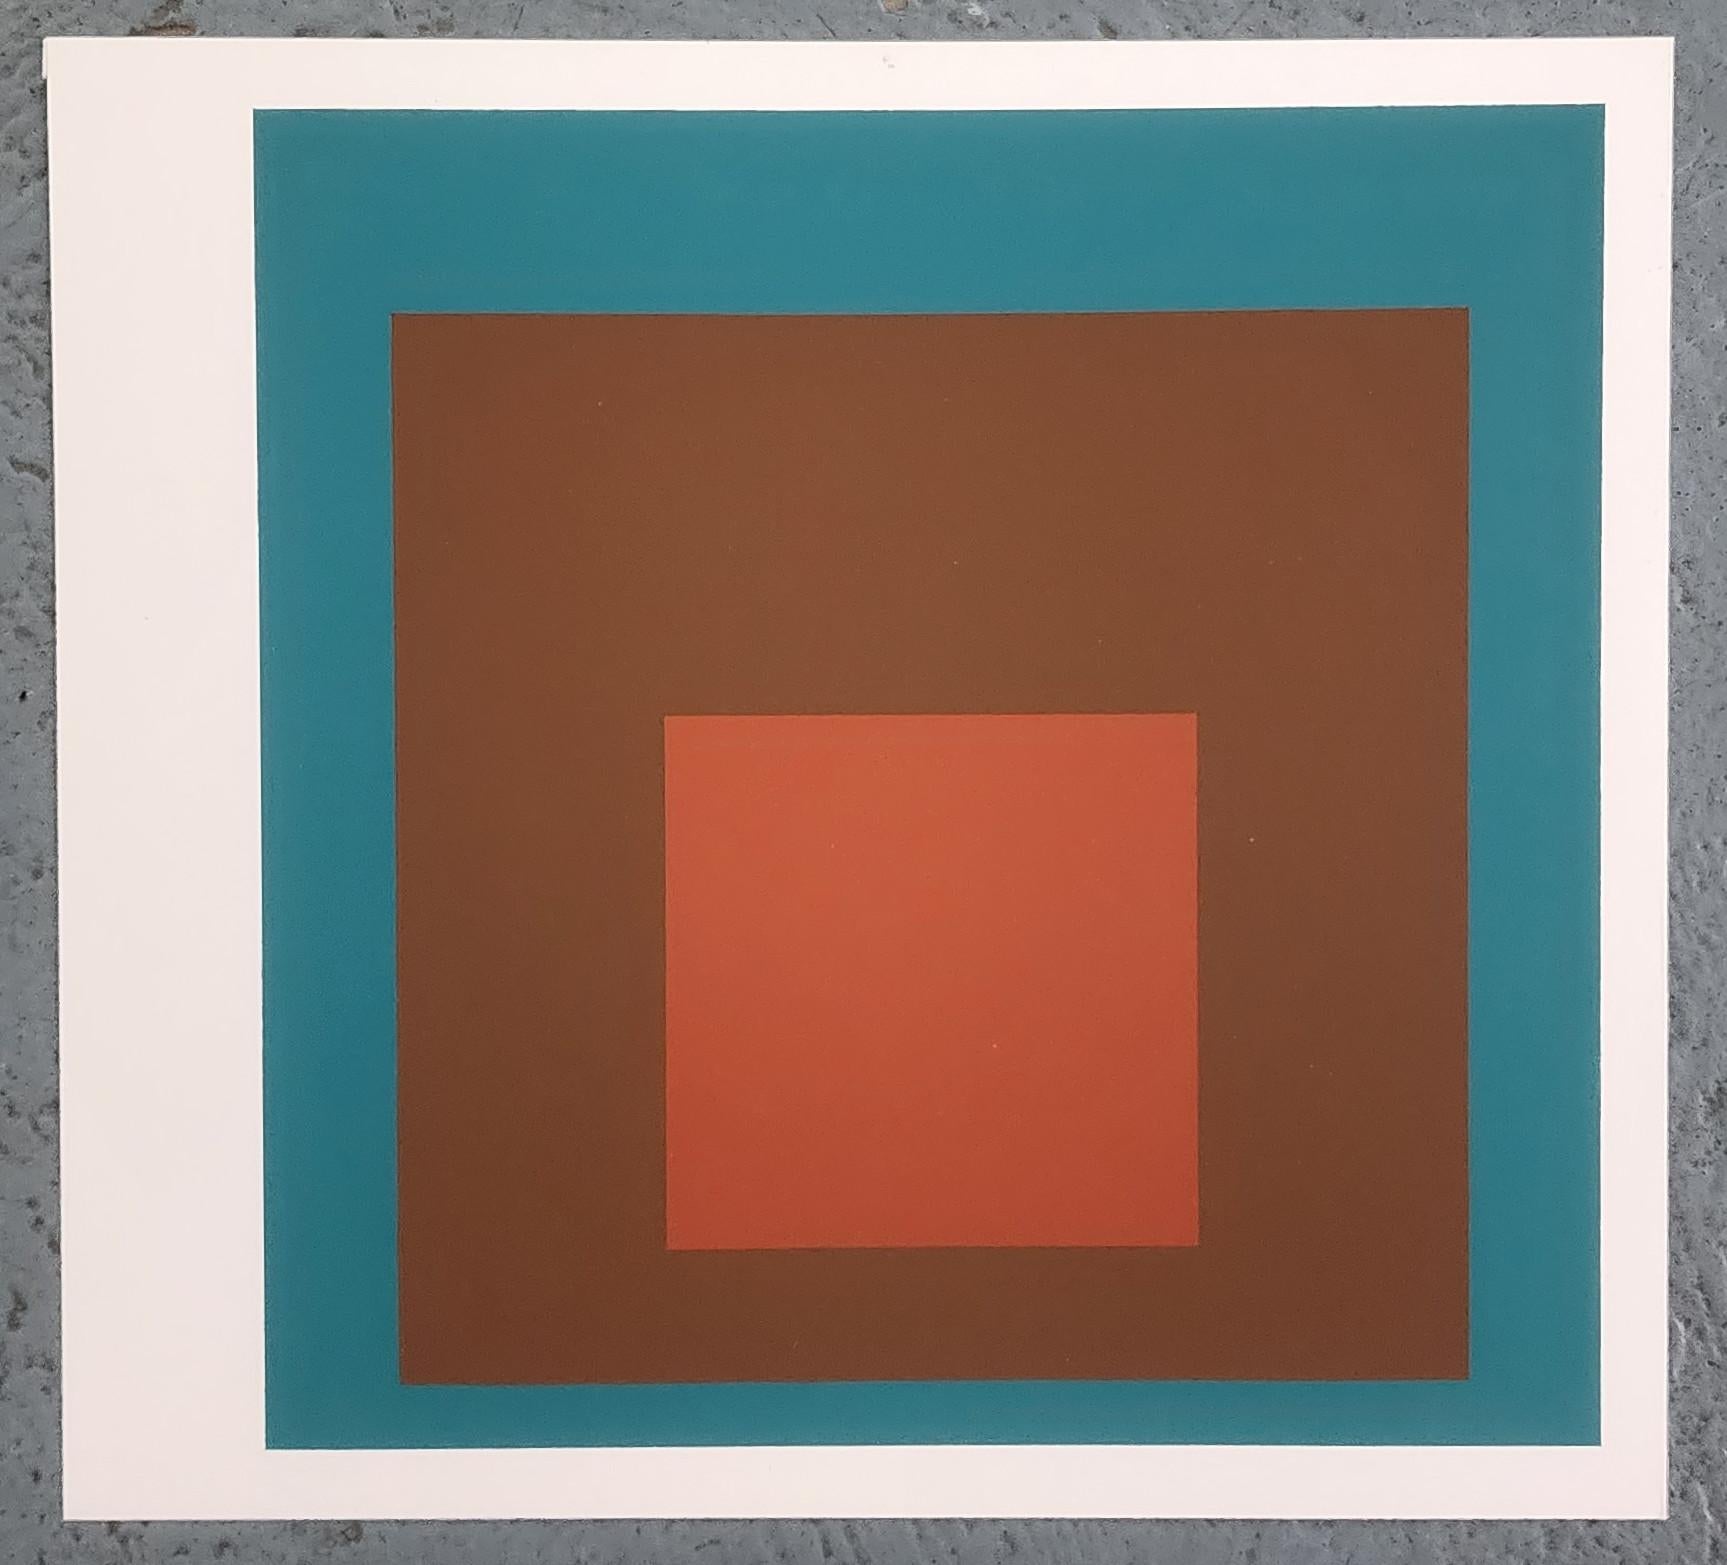 Homage to the Square: At Night (Bauhaus, Minimalism, 50% OFF LIST PRICE) - Modern Print by (after) Josef Albers